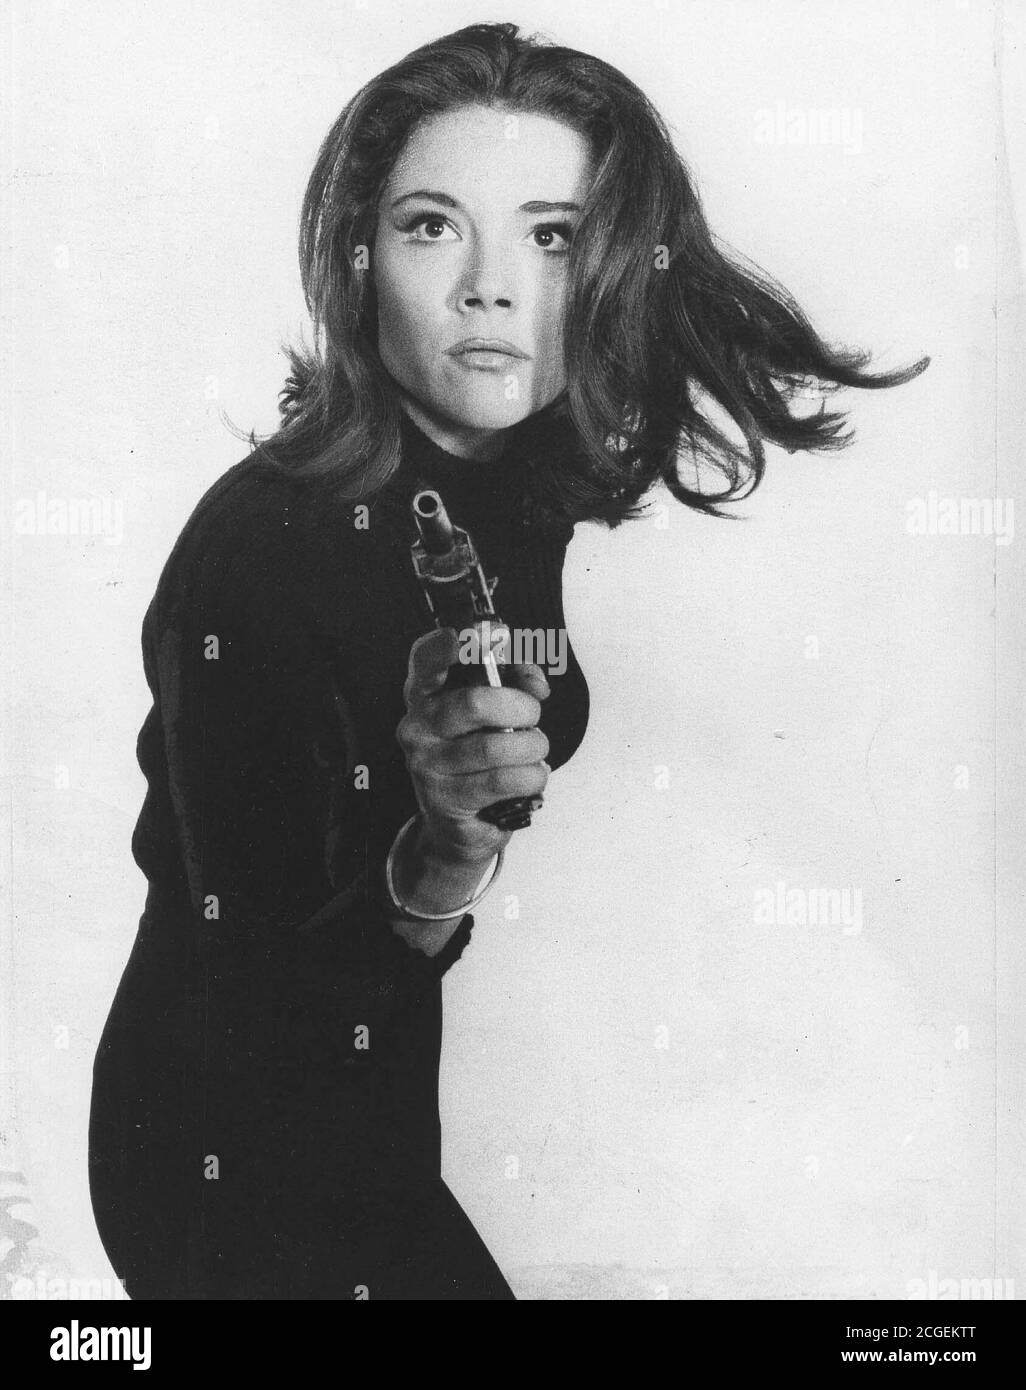 The Avengers/Bond/Game of Thrones photograph 11 Diana Rigg glossy A4 print